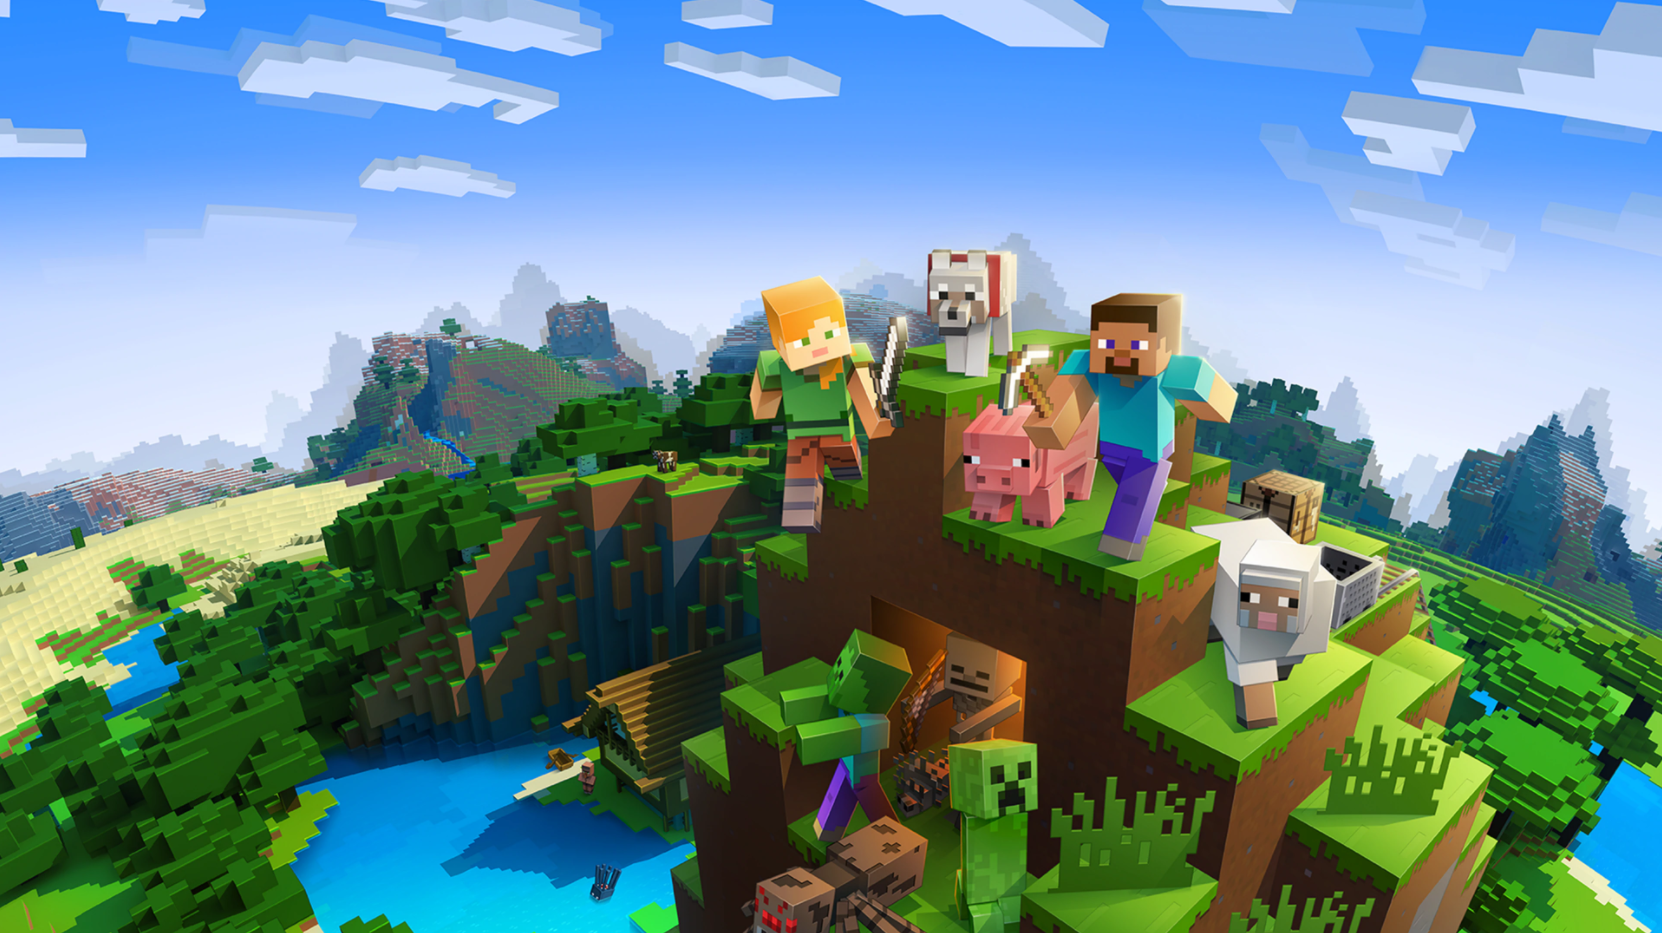 All you need to know about Minecraft on PlayStation 4 and 5